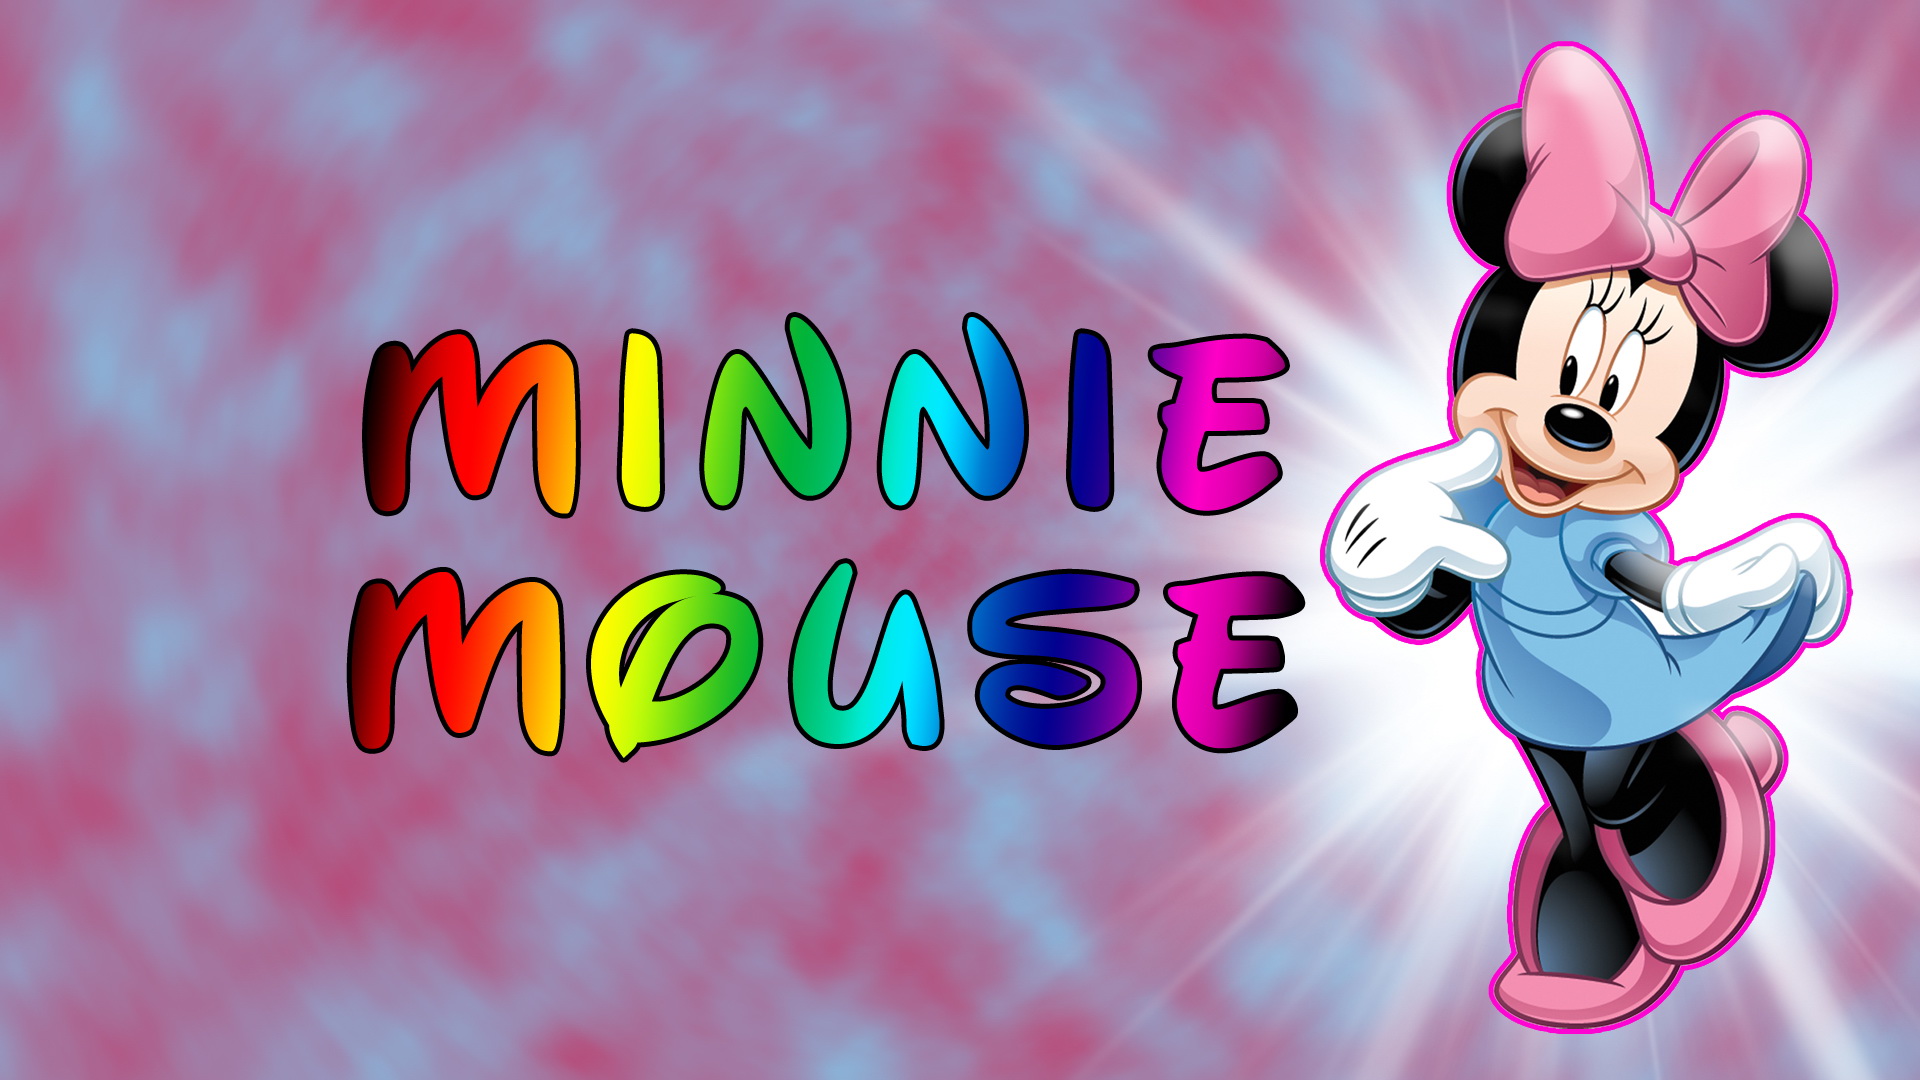 Minnie Mouse Wallpaper - Backgrounds Minnie Mouse , HD Wallpaper & Backgrounds